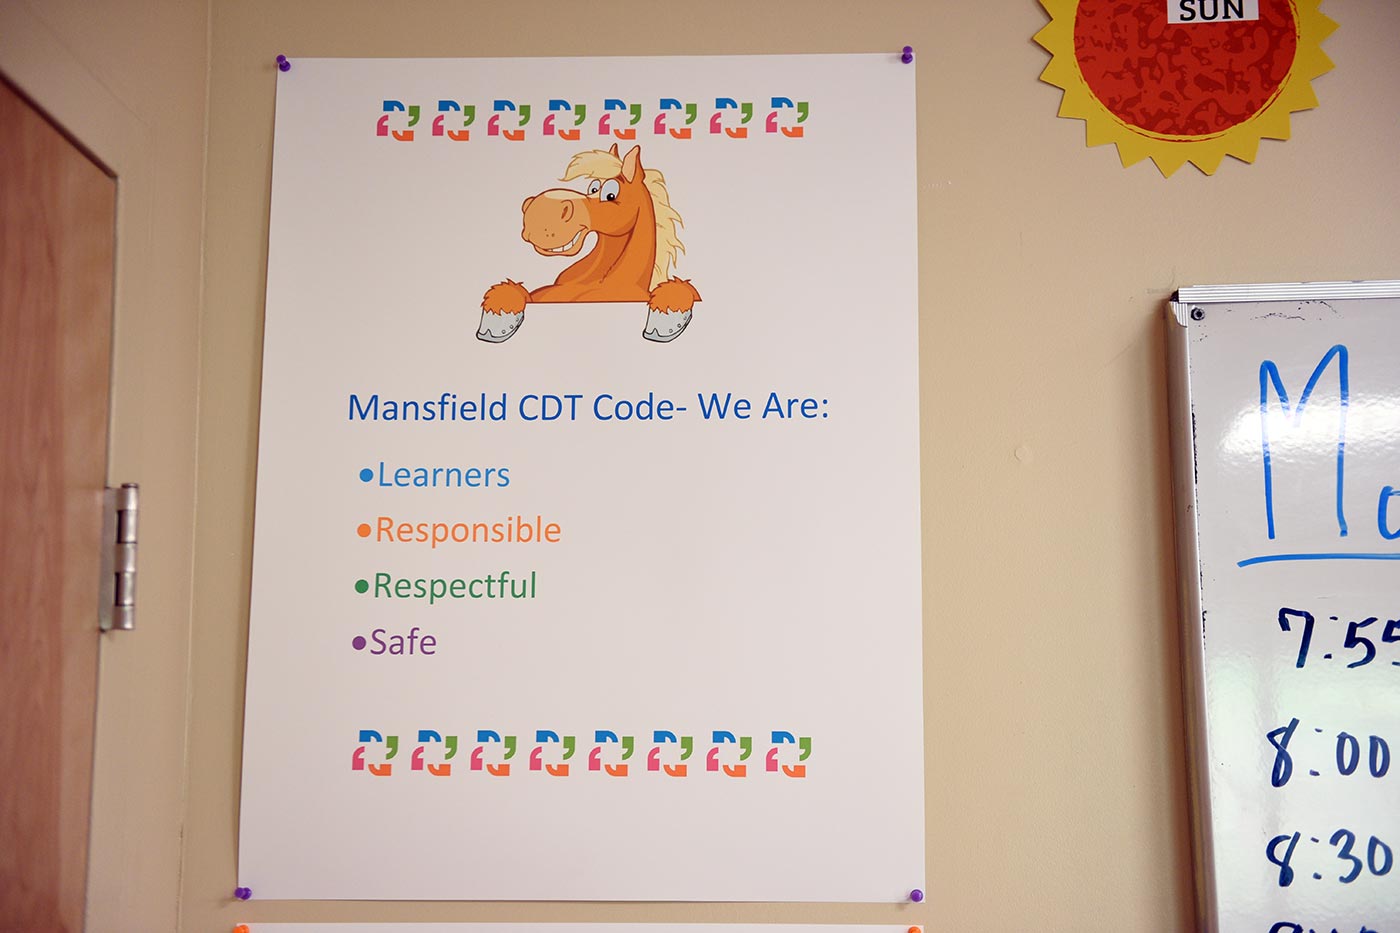 Mansfield cdt code is to be learners, responsible, respectful, safe